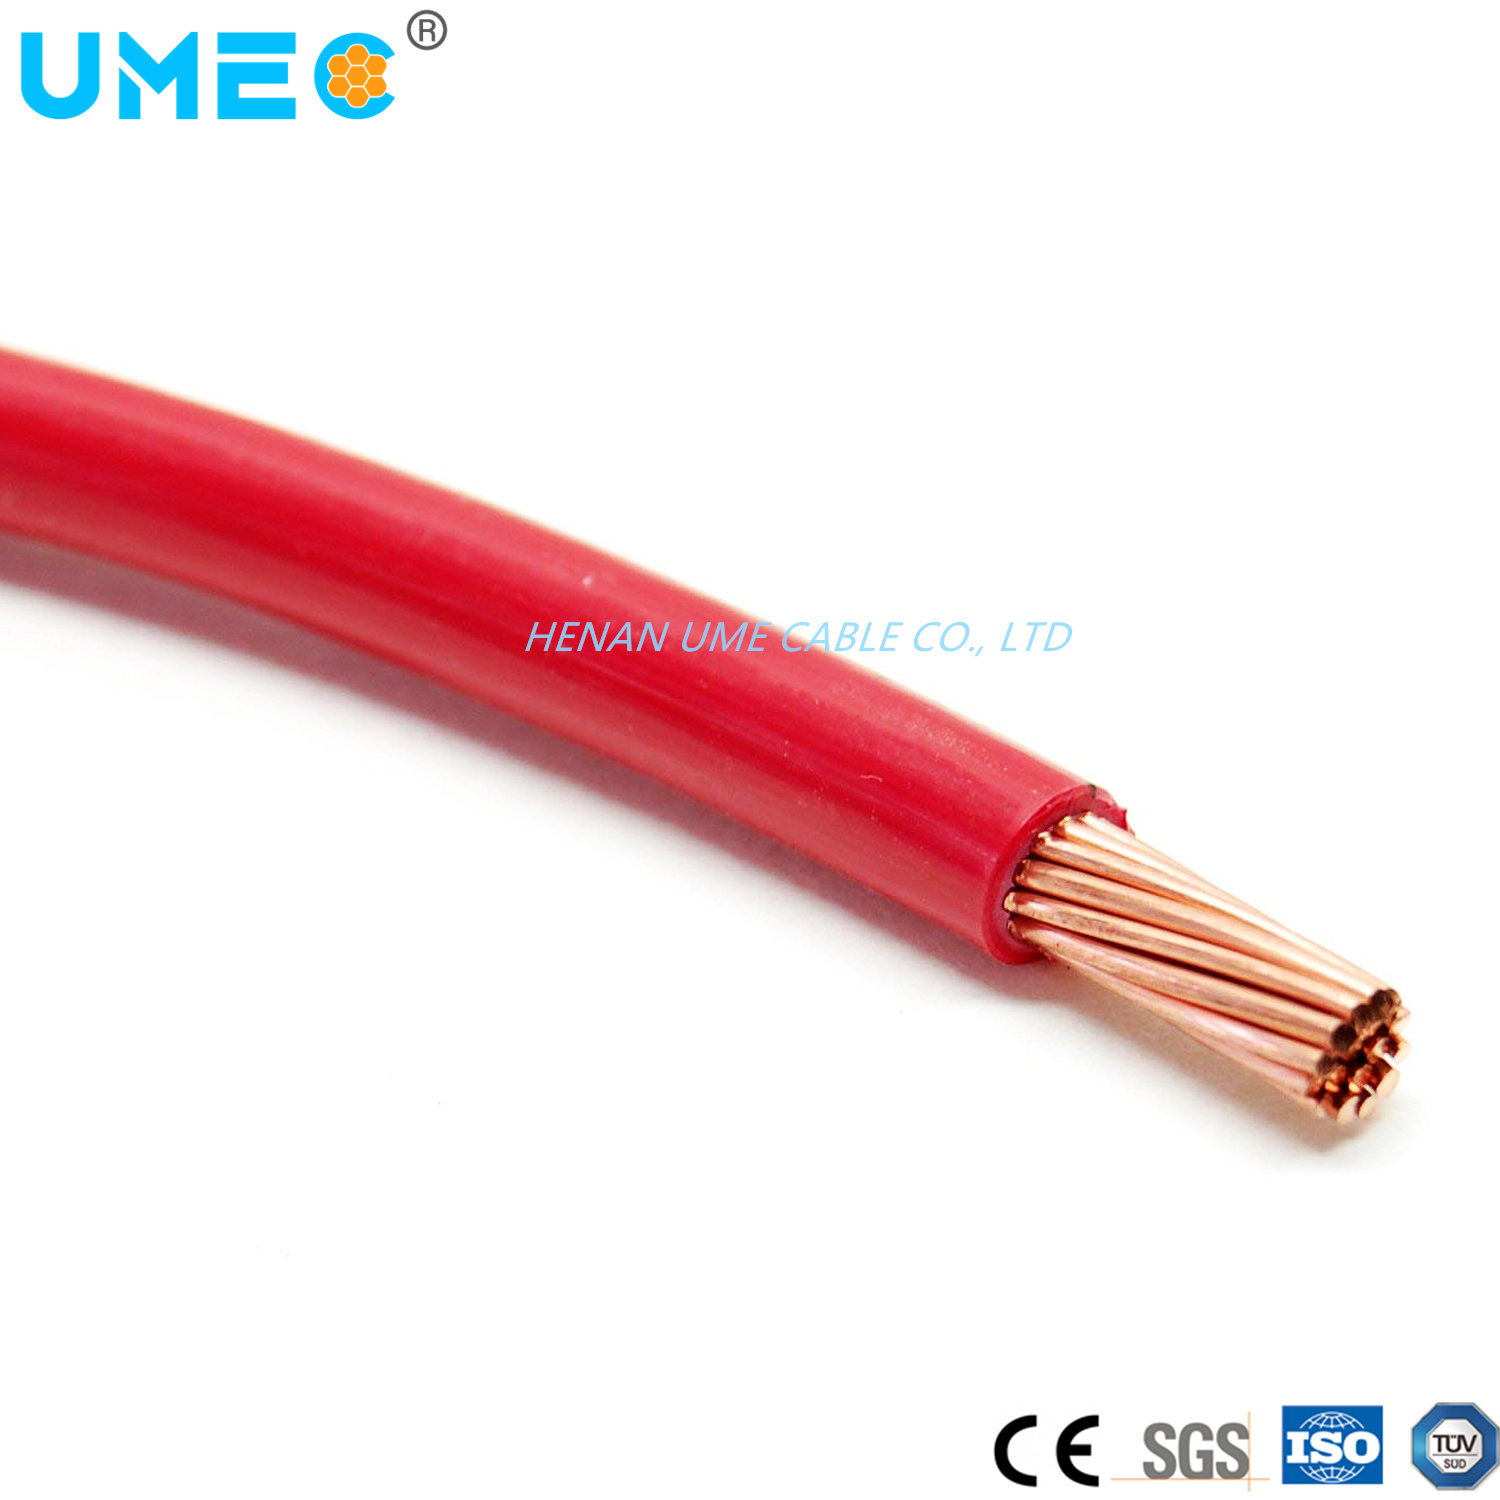 Factory Direct 600volts Thhn Thwn 6guage 8guage Solid or Stranded Copper Electrical Wire Dry or Wet Wire